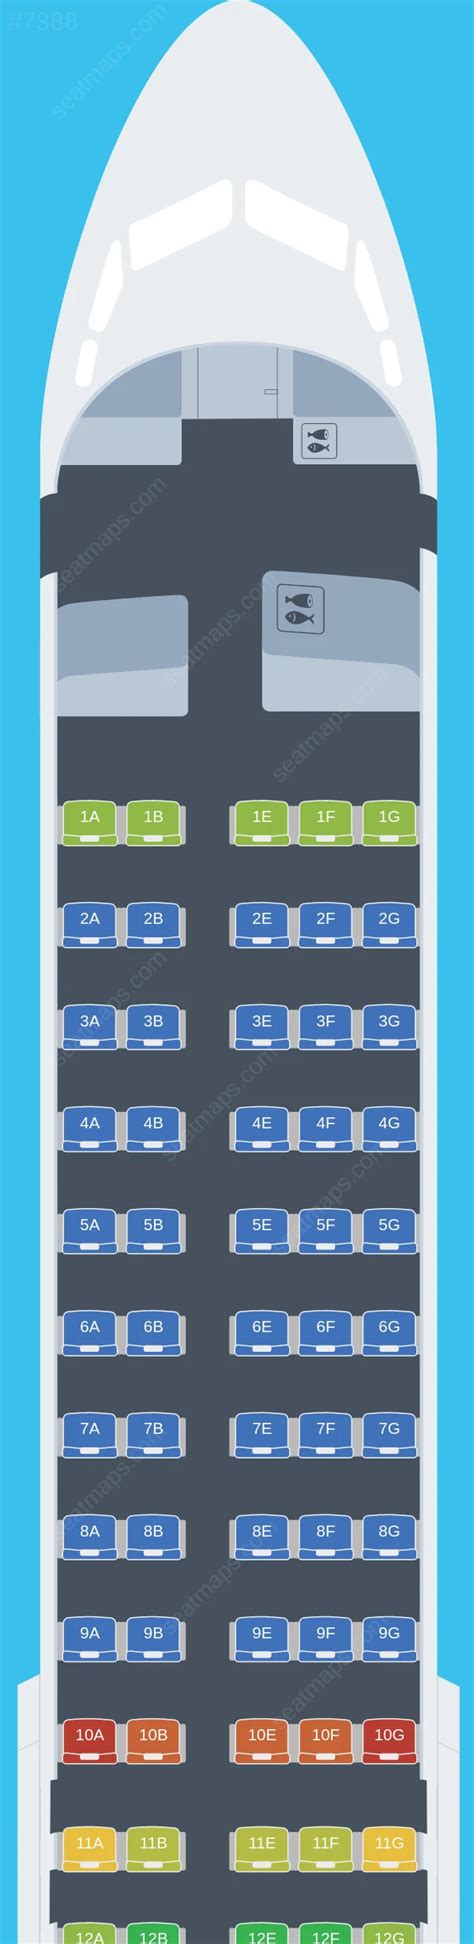 Seat Map Ratings Of Alliance Airlines Fokker F100